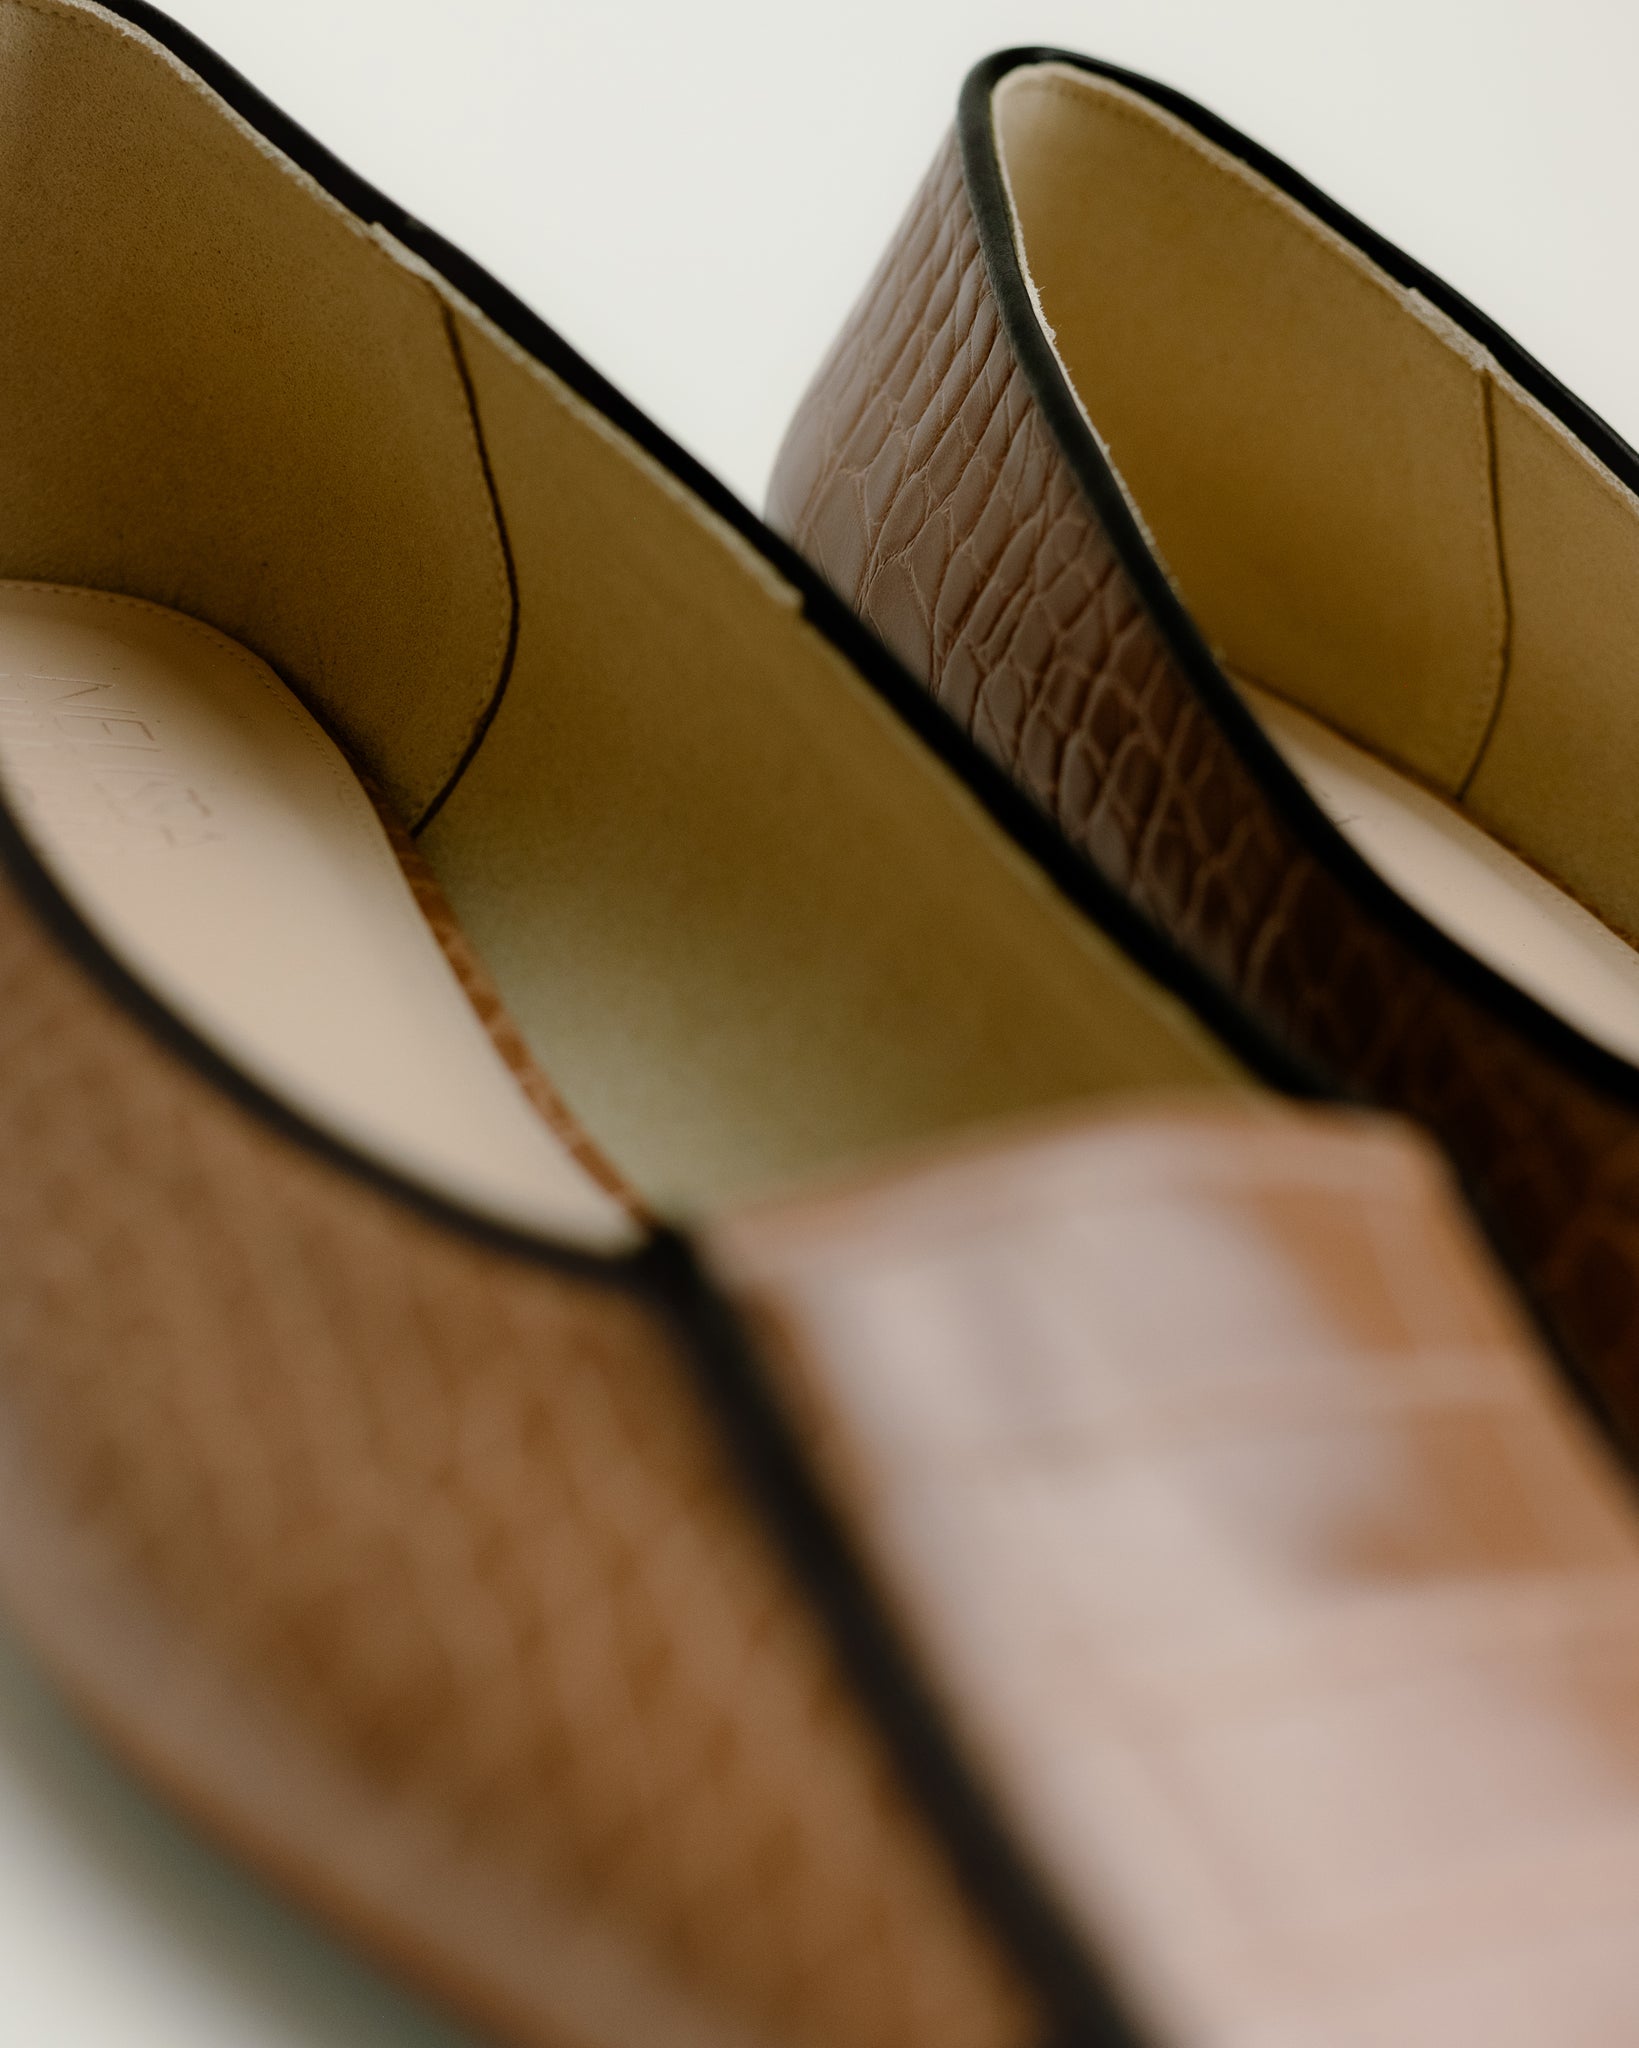 Drew Square Toe Loafers (Nude)